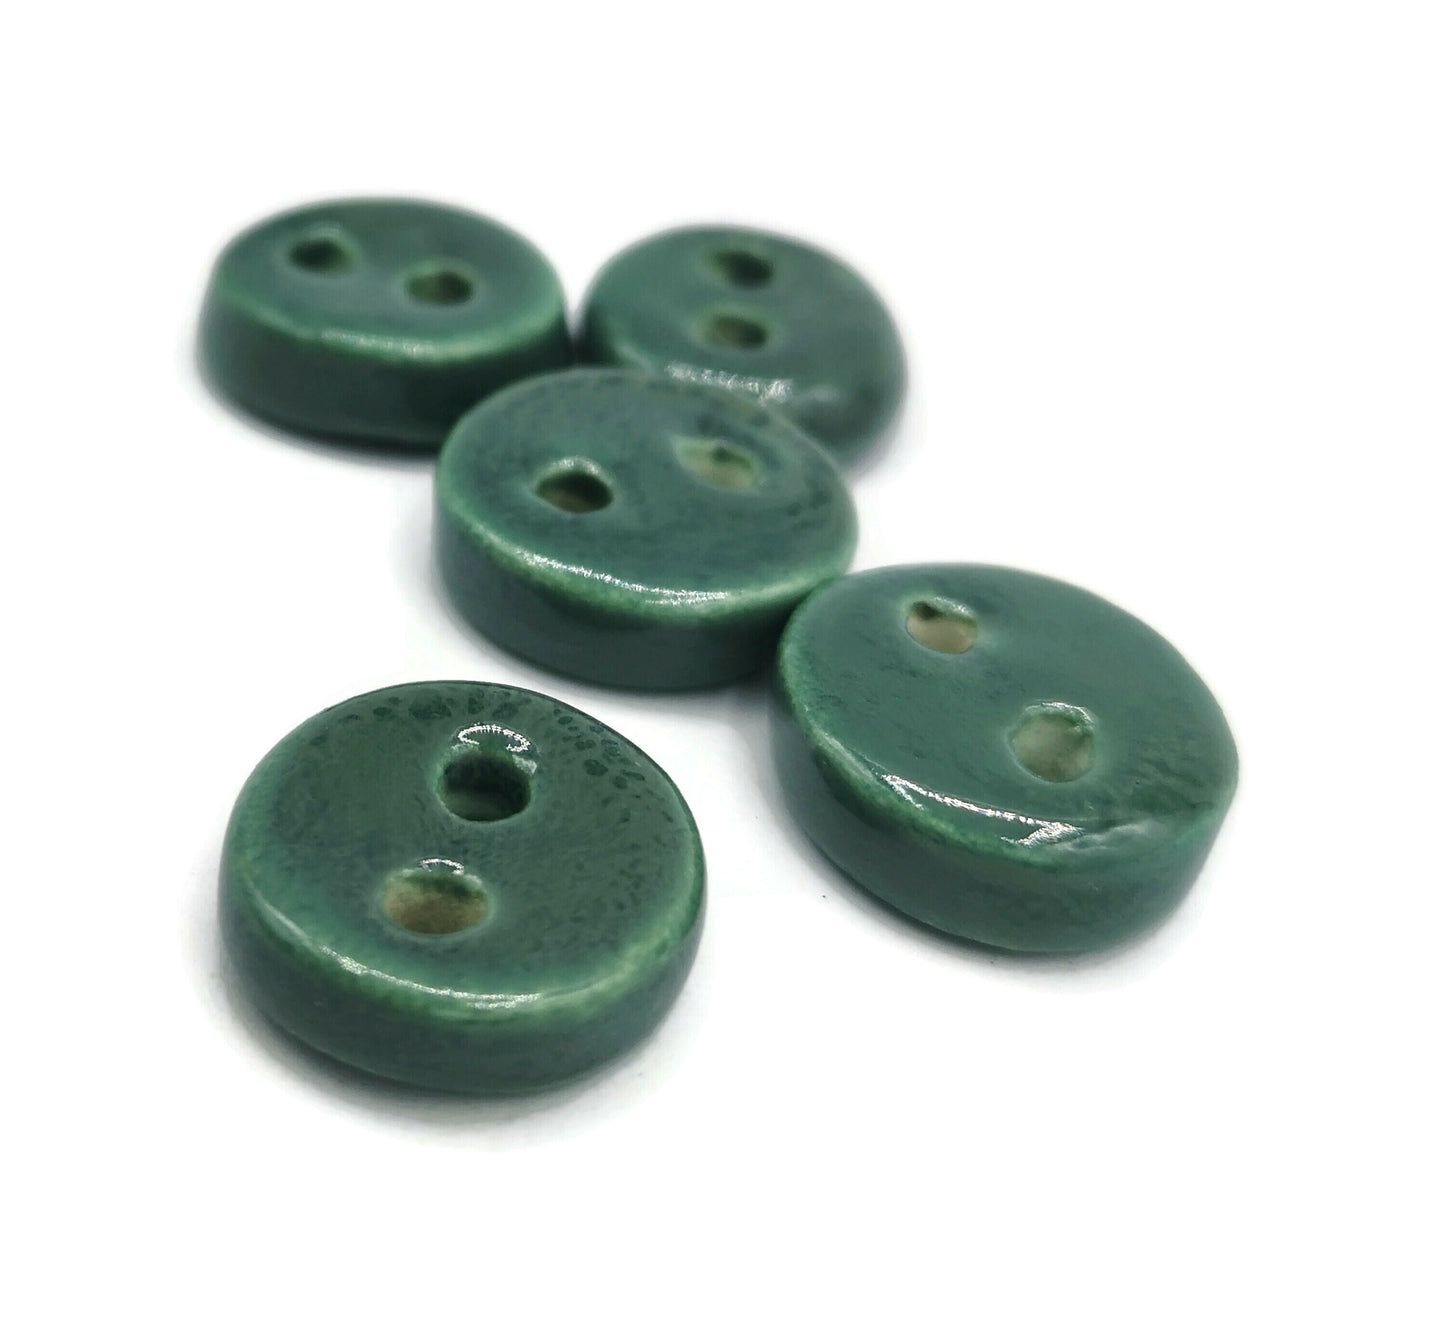 Coat Buttons, 5 Pcs Sewing Buttons Antique Look, Handmade Ceramic Beads For Jewelry Making, Sewing Supplies And Notions, Best Gifts For Her - Ceramica Ana Rafael